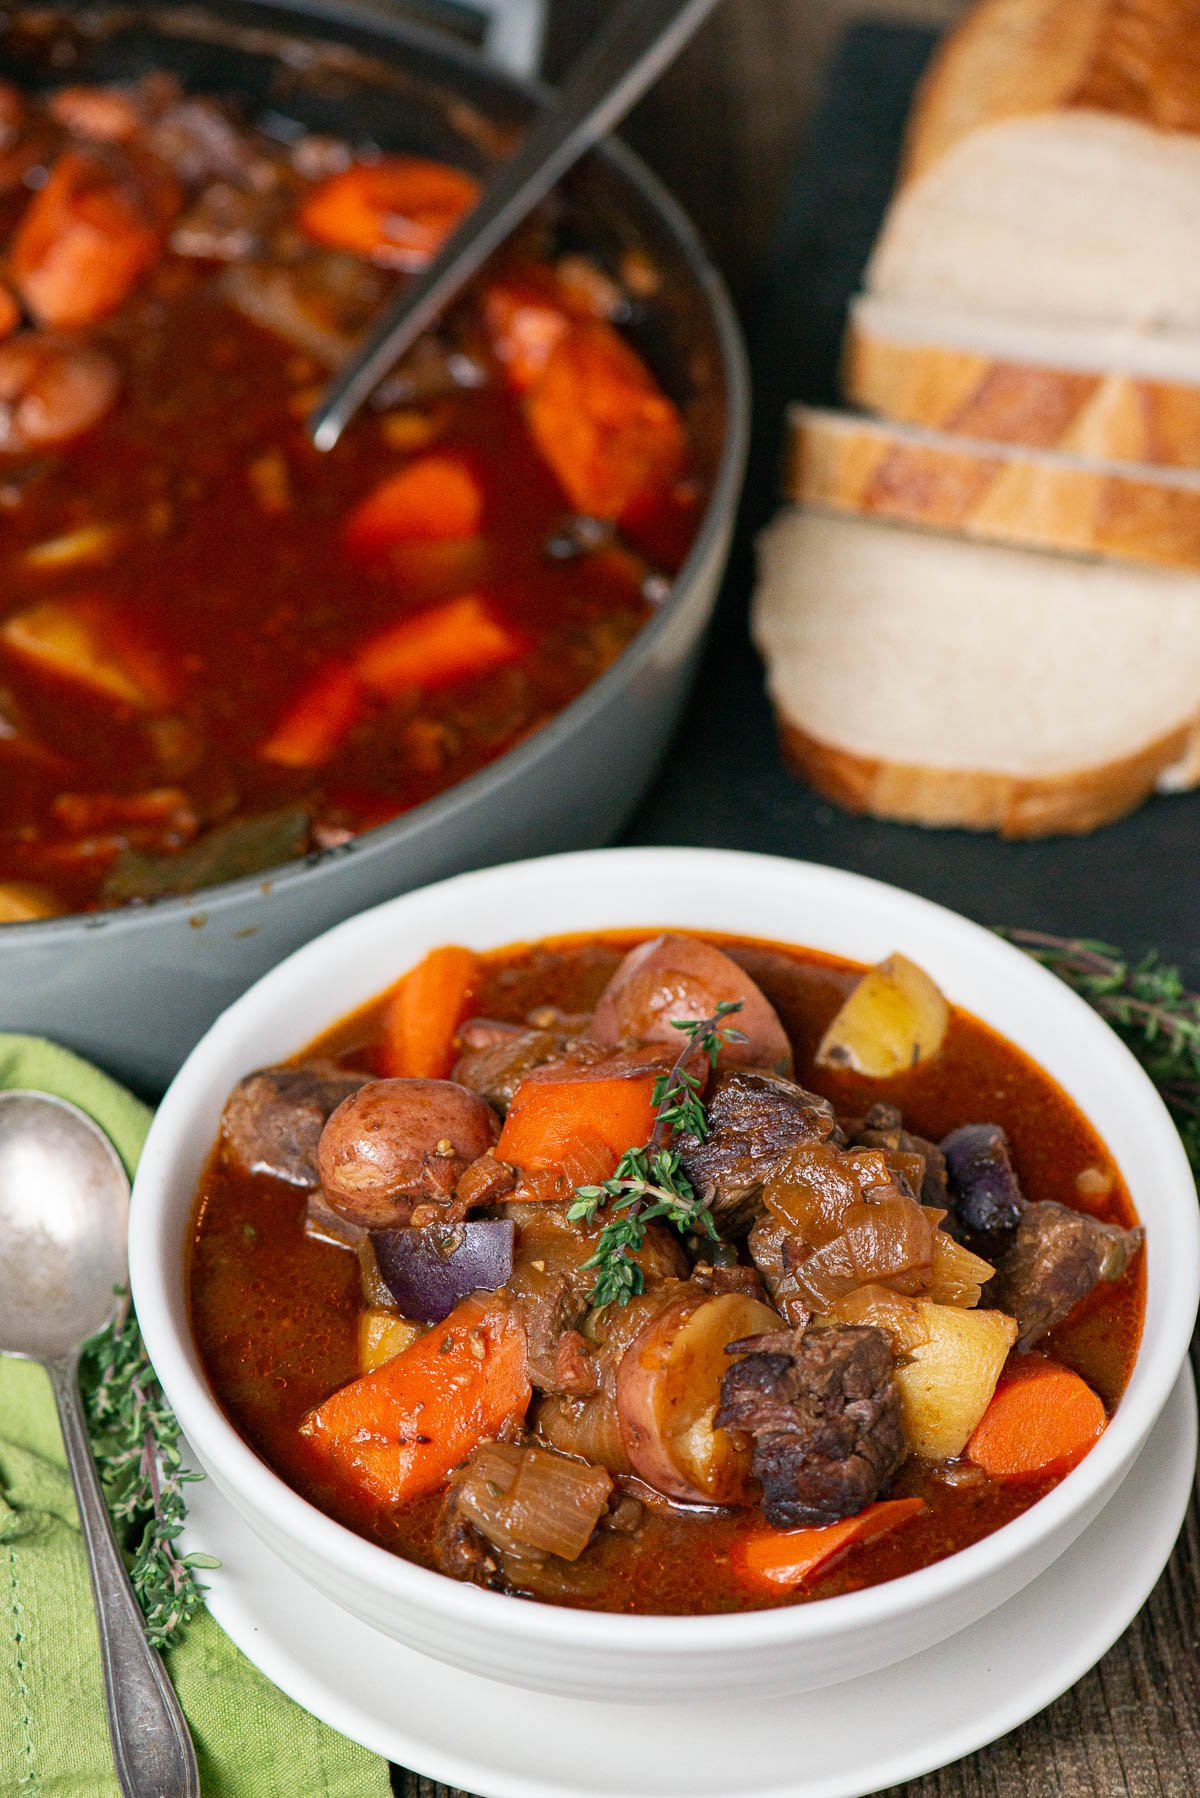 Bowl of Irish stew with sliced bread on side.